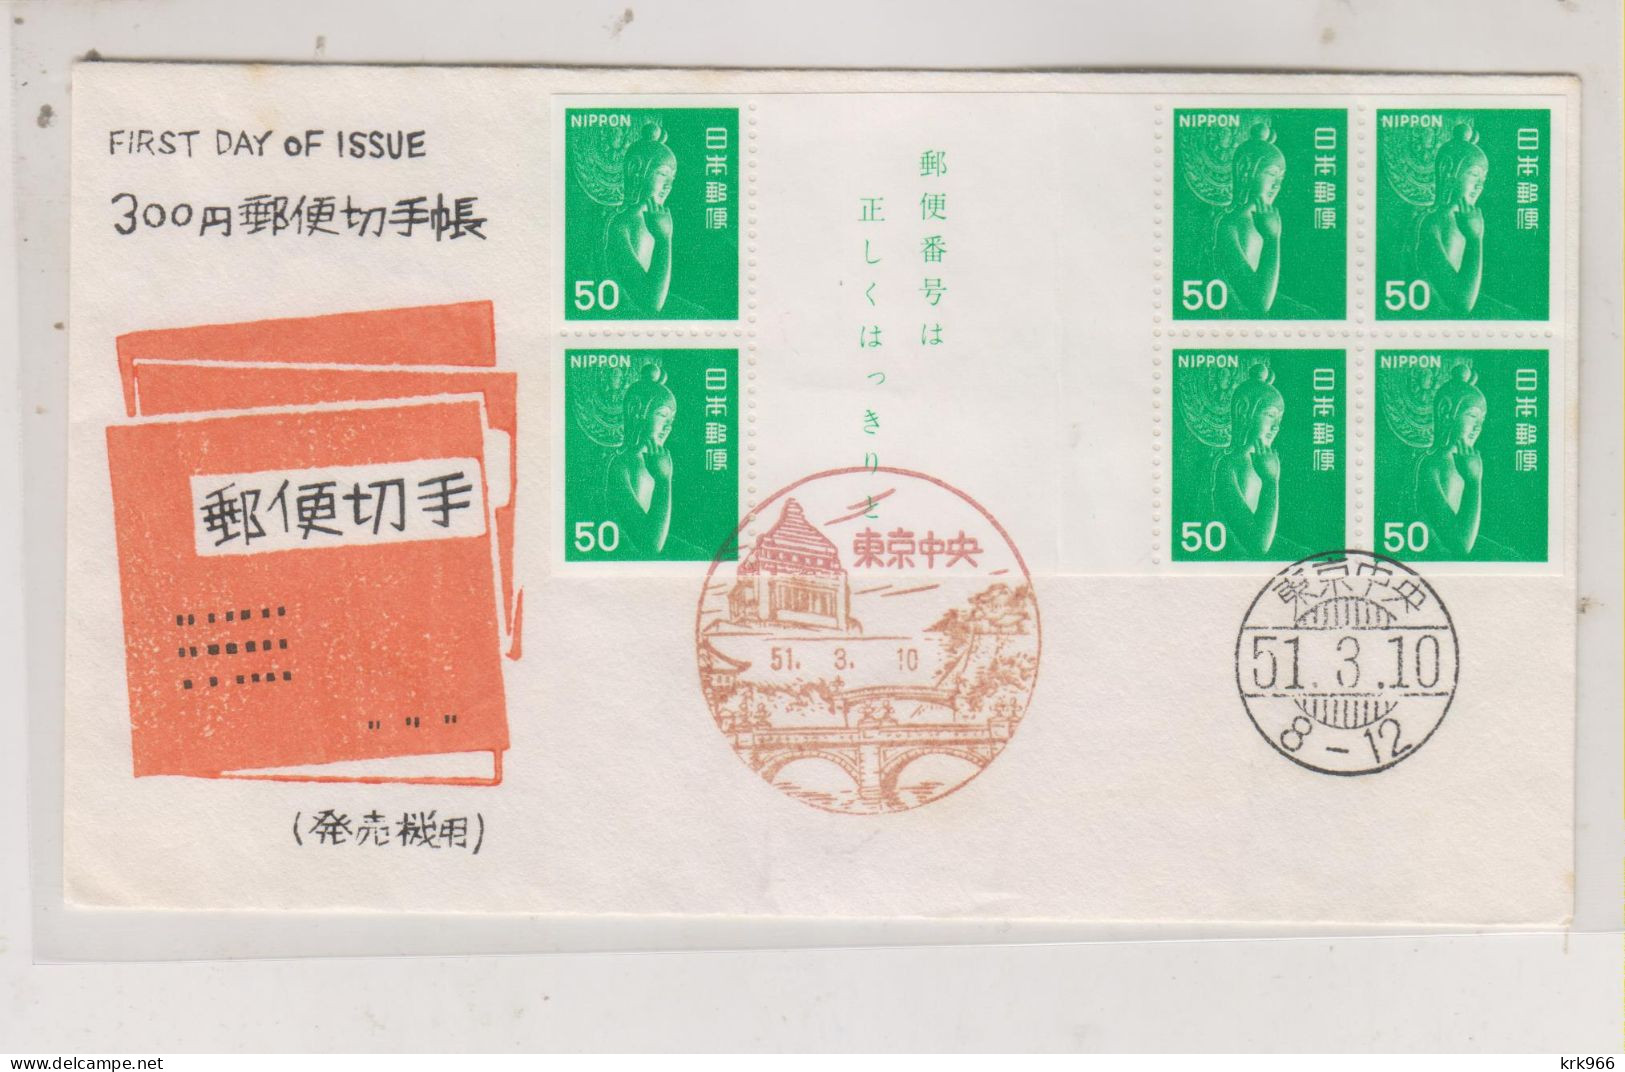 JAPAN Nice FDC Cover - FDC